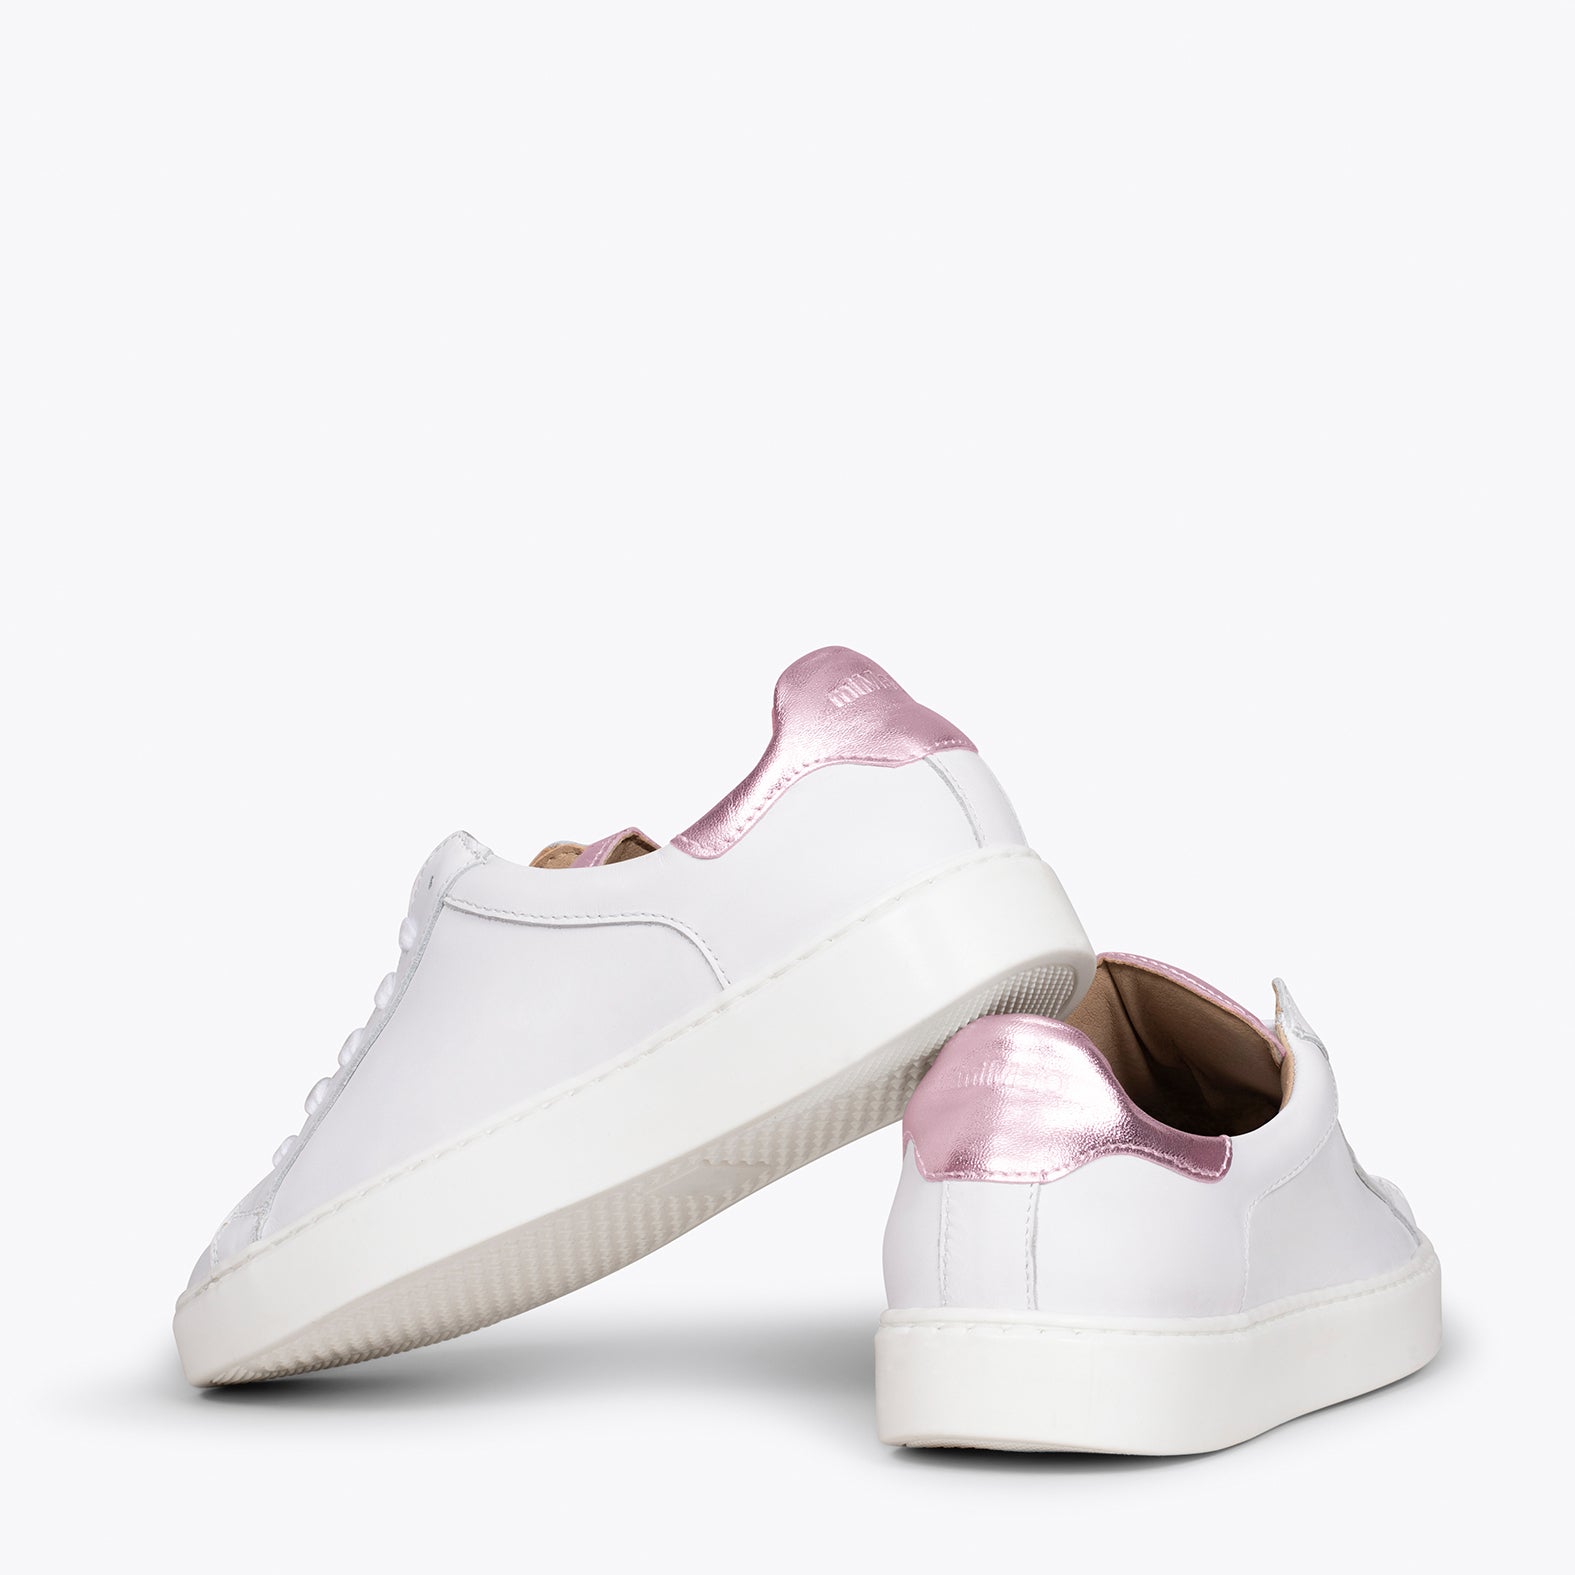 SNEAKER – WHITE casual sneaker with PINK detail